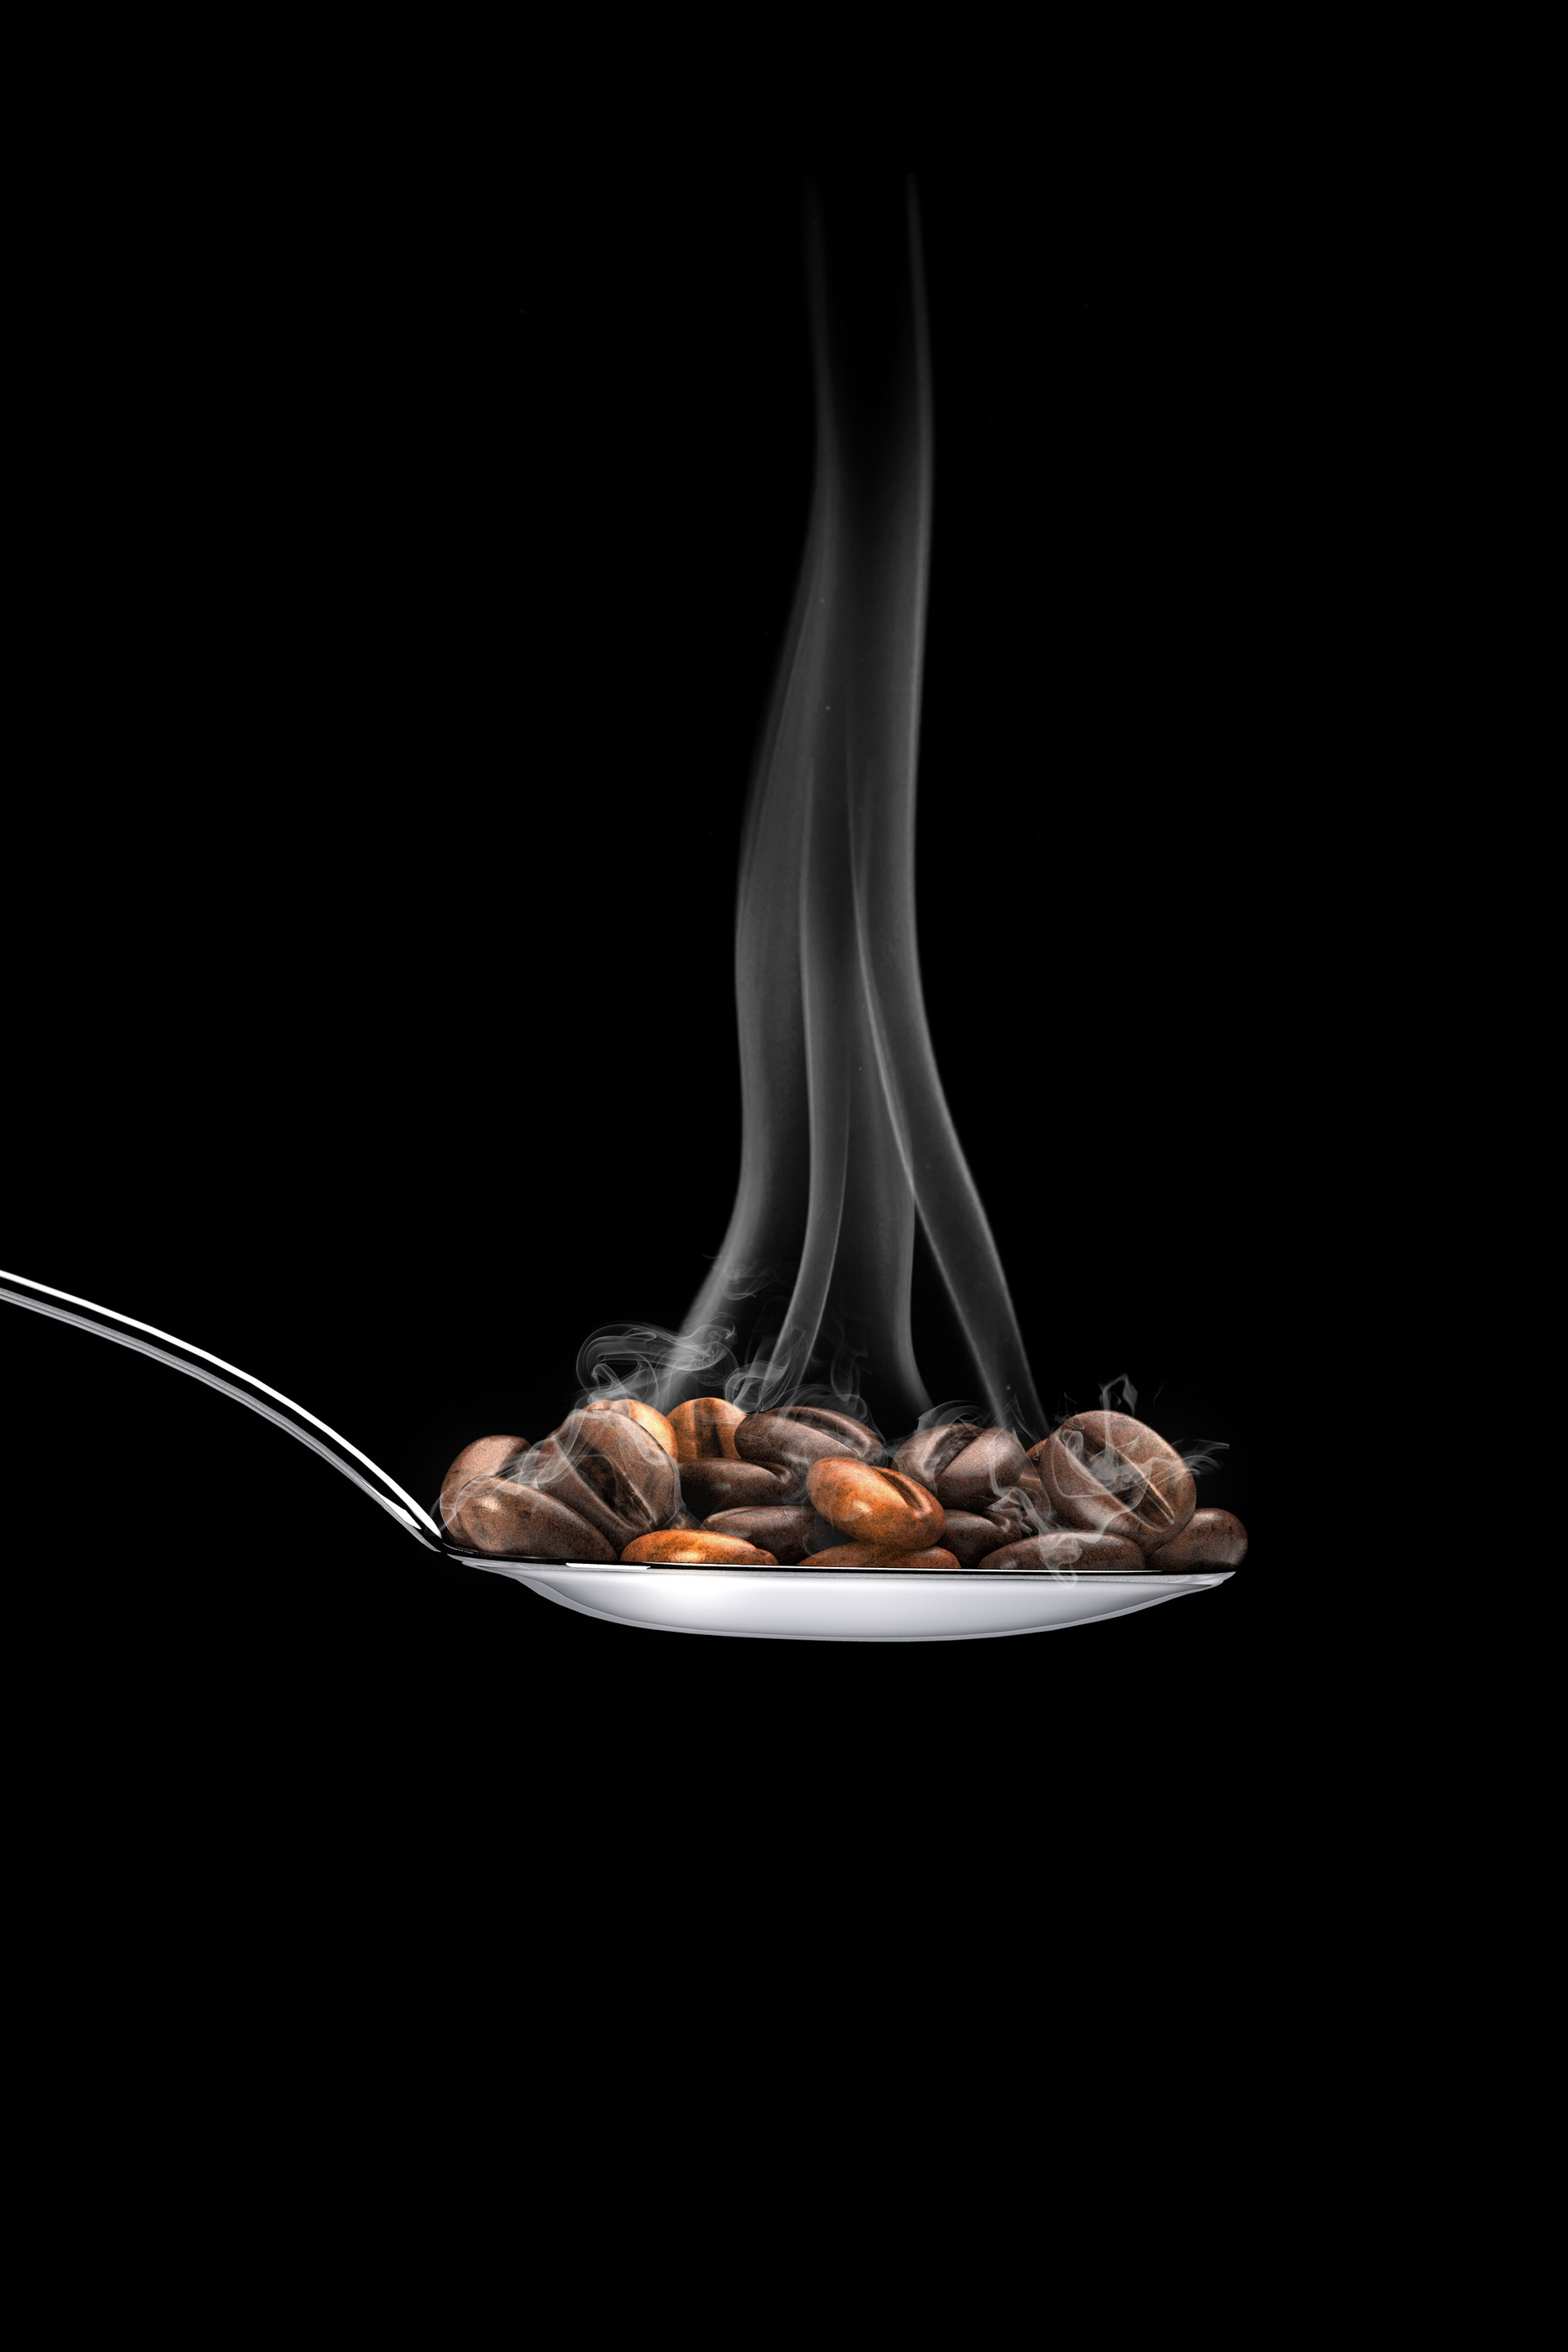 120133 download wallpaper coffee, minimalism, steam, coffee beans, spoon screensavers and pictures for free